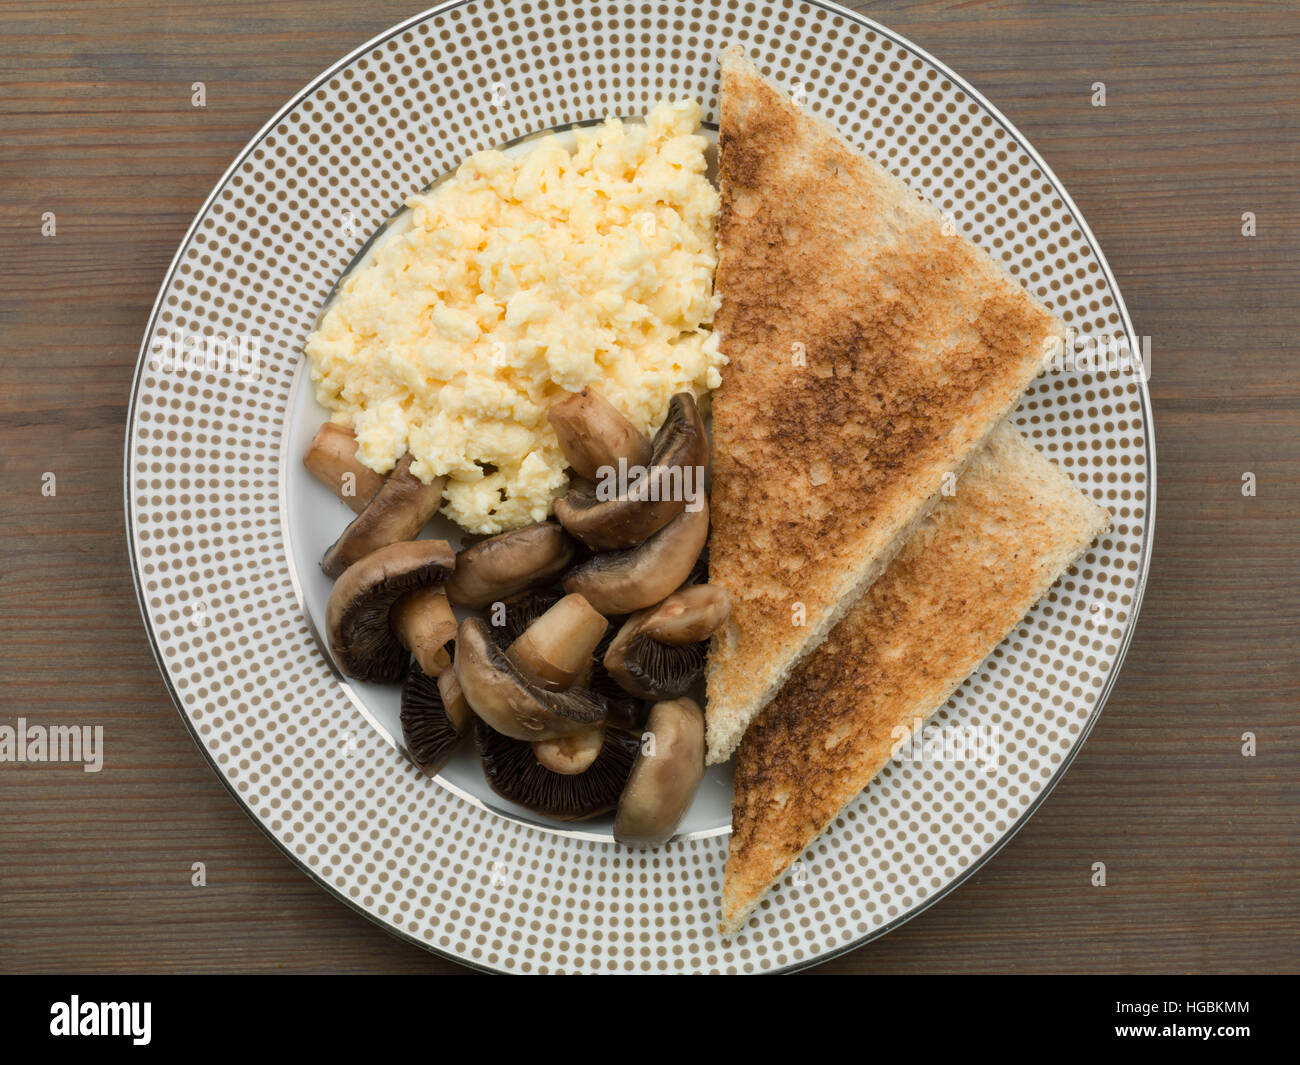 Healthy Cooked Breakfast Of Fresh Scrambled Eggs Mushrooms And Toast Served On A Plate A Flat Lay Composition With No People A Calorie Controlled Diet Stock Photo